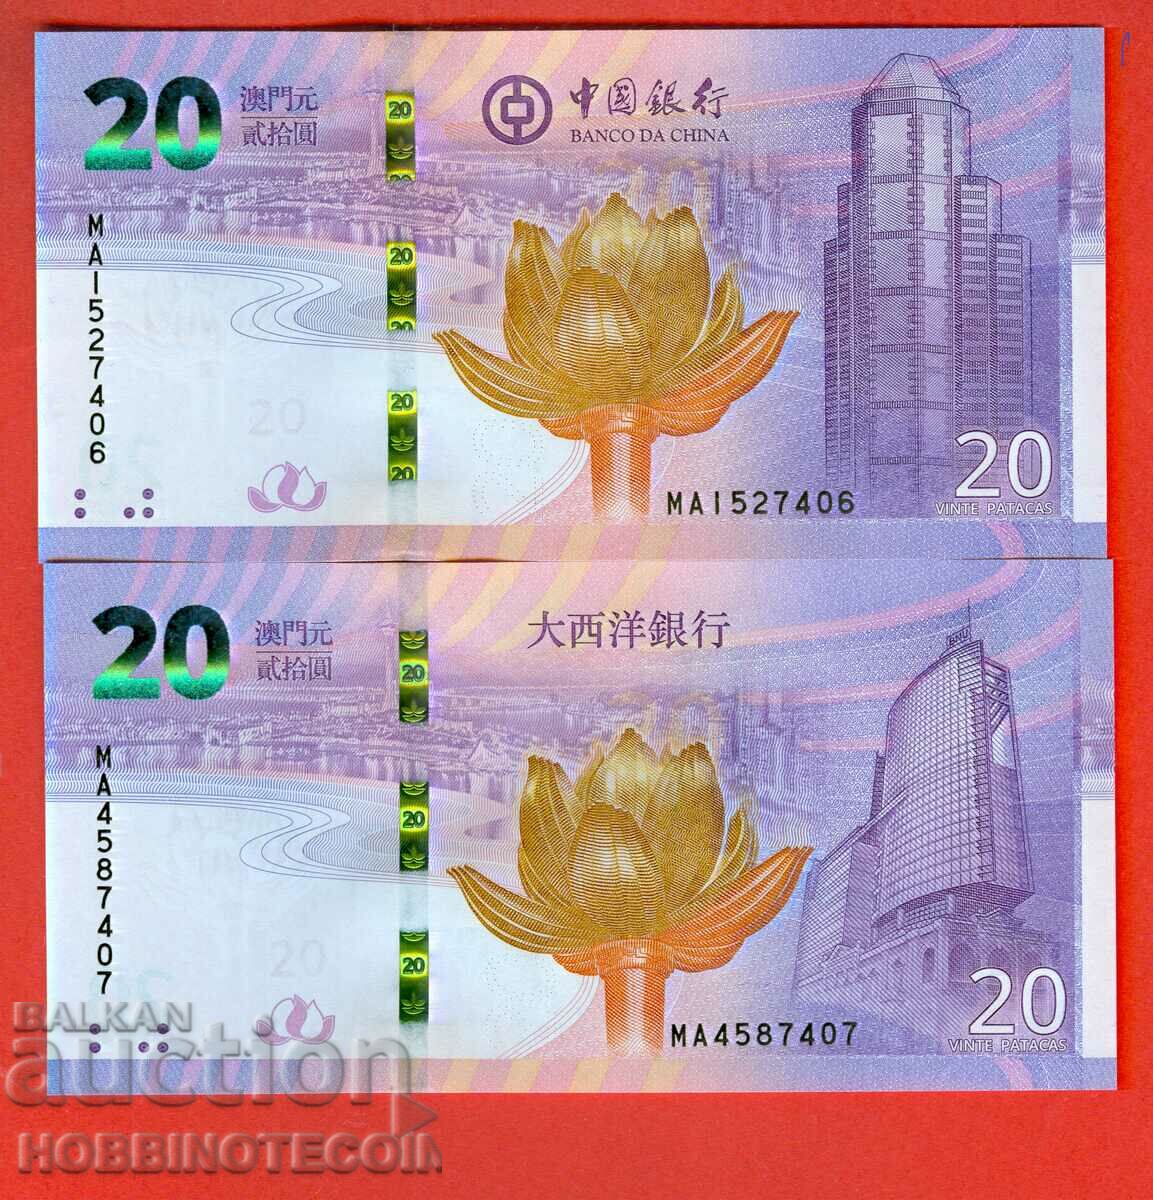 MACAO MACAO 2 x 20 Pataka MOST issue 2019 NEW UNC